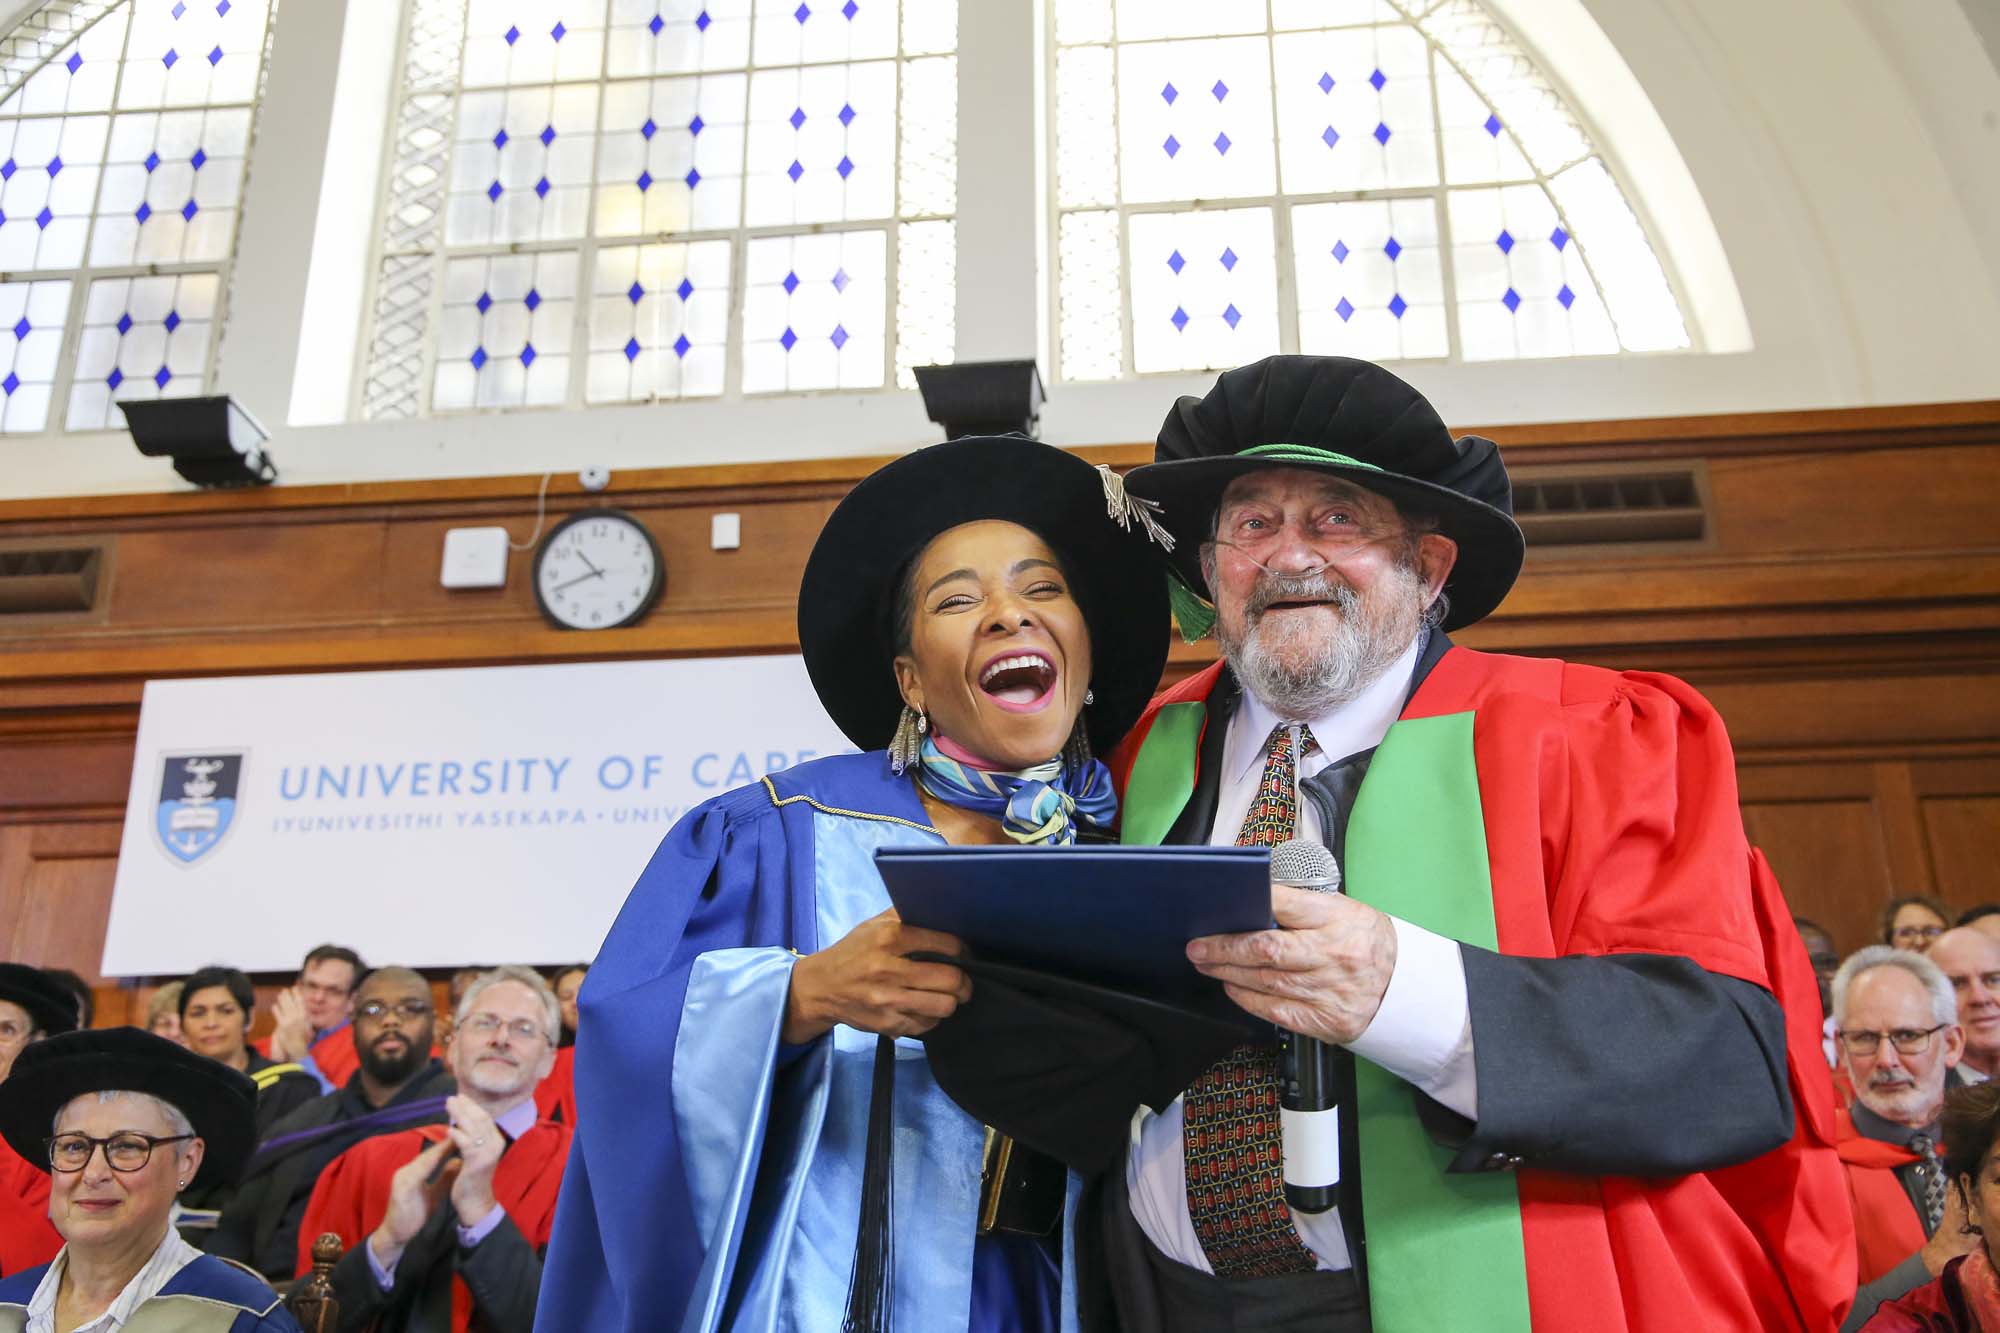 UCT awarded a Doctor of Science in Engineering (honoris causa) to Denis Goldberg at a graduation ceremony on 12 July in recognition of his courageous and selfless role in the anti-apartheid struggle over decades.